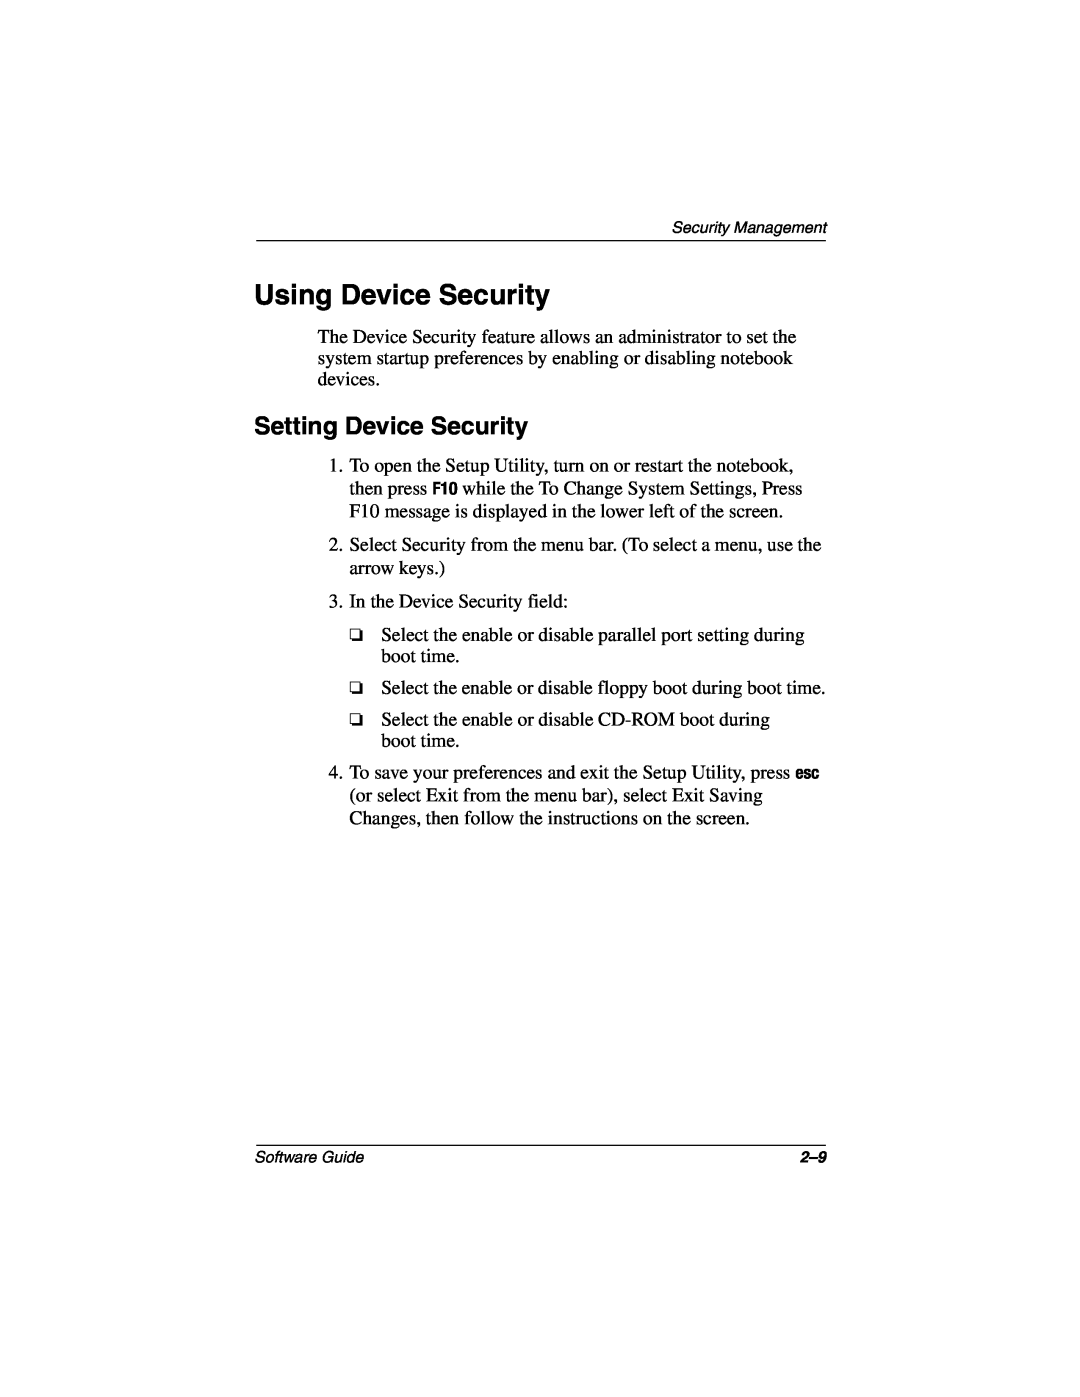 HP 907EA, 955AP, 950AP, 943AP, 940AP, 935AP, 927AP, 930AP, 925EA, 908EA, 906EA, 905US Using Device Security, Setting Device Security 